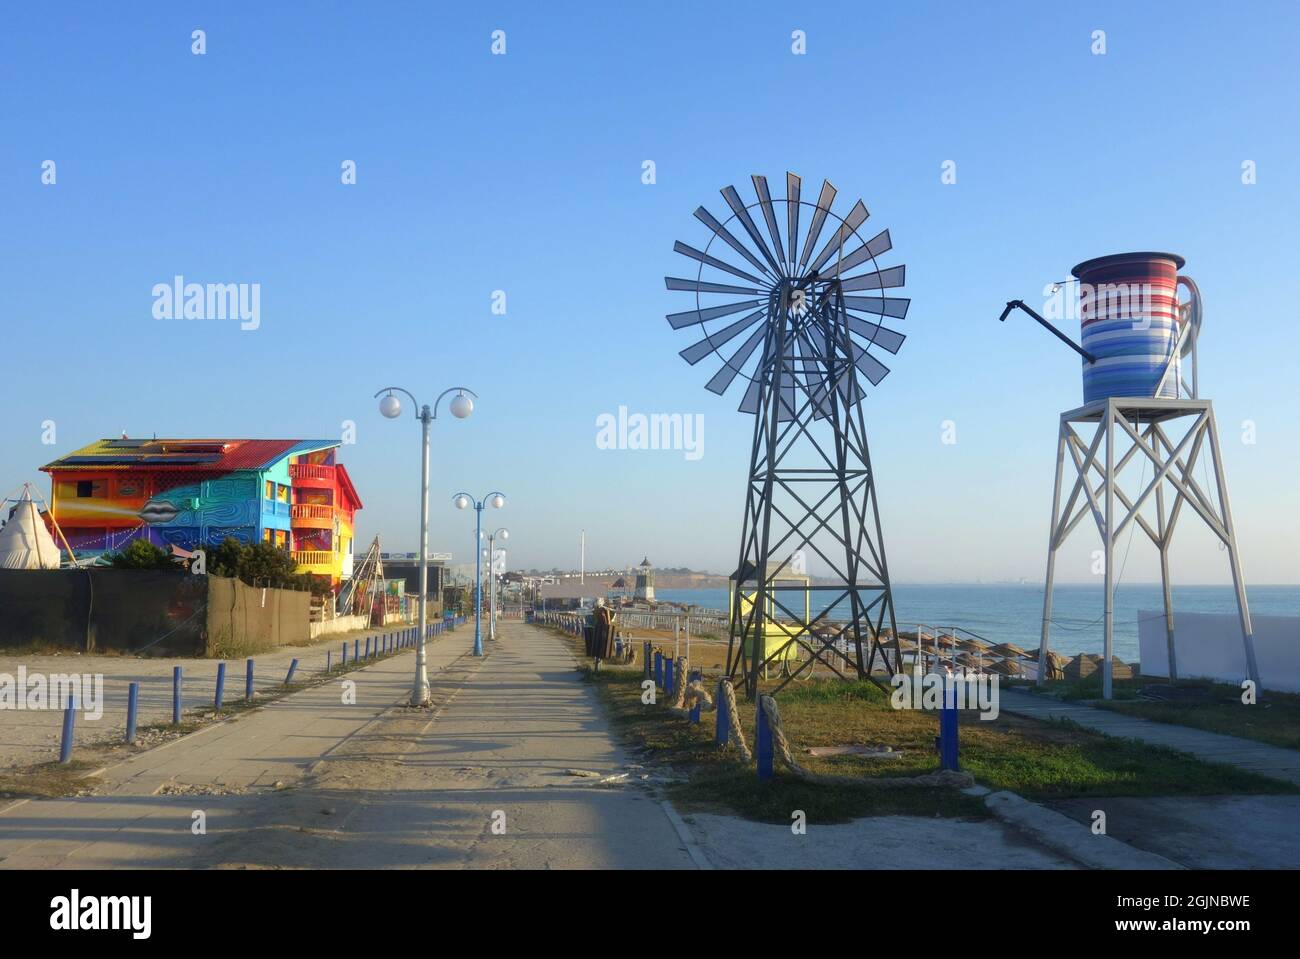 Empty footway in Vama Veche nonconformist resort on the Black Sea shore in Romania in early morning at the end of the summer season Stock Photo